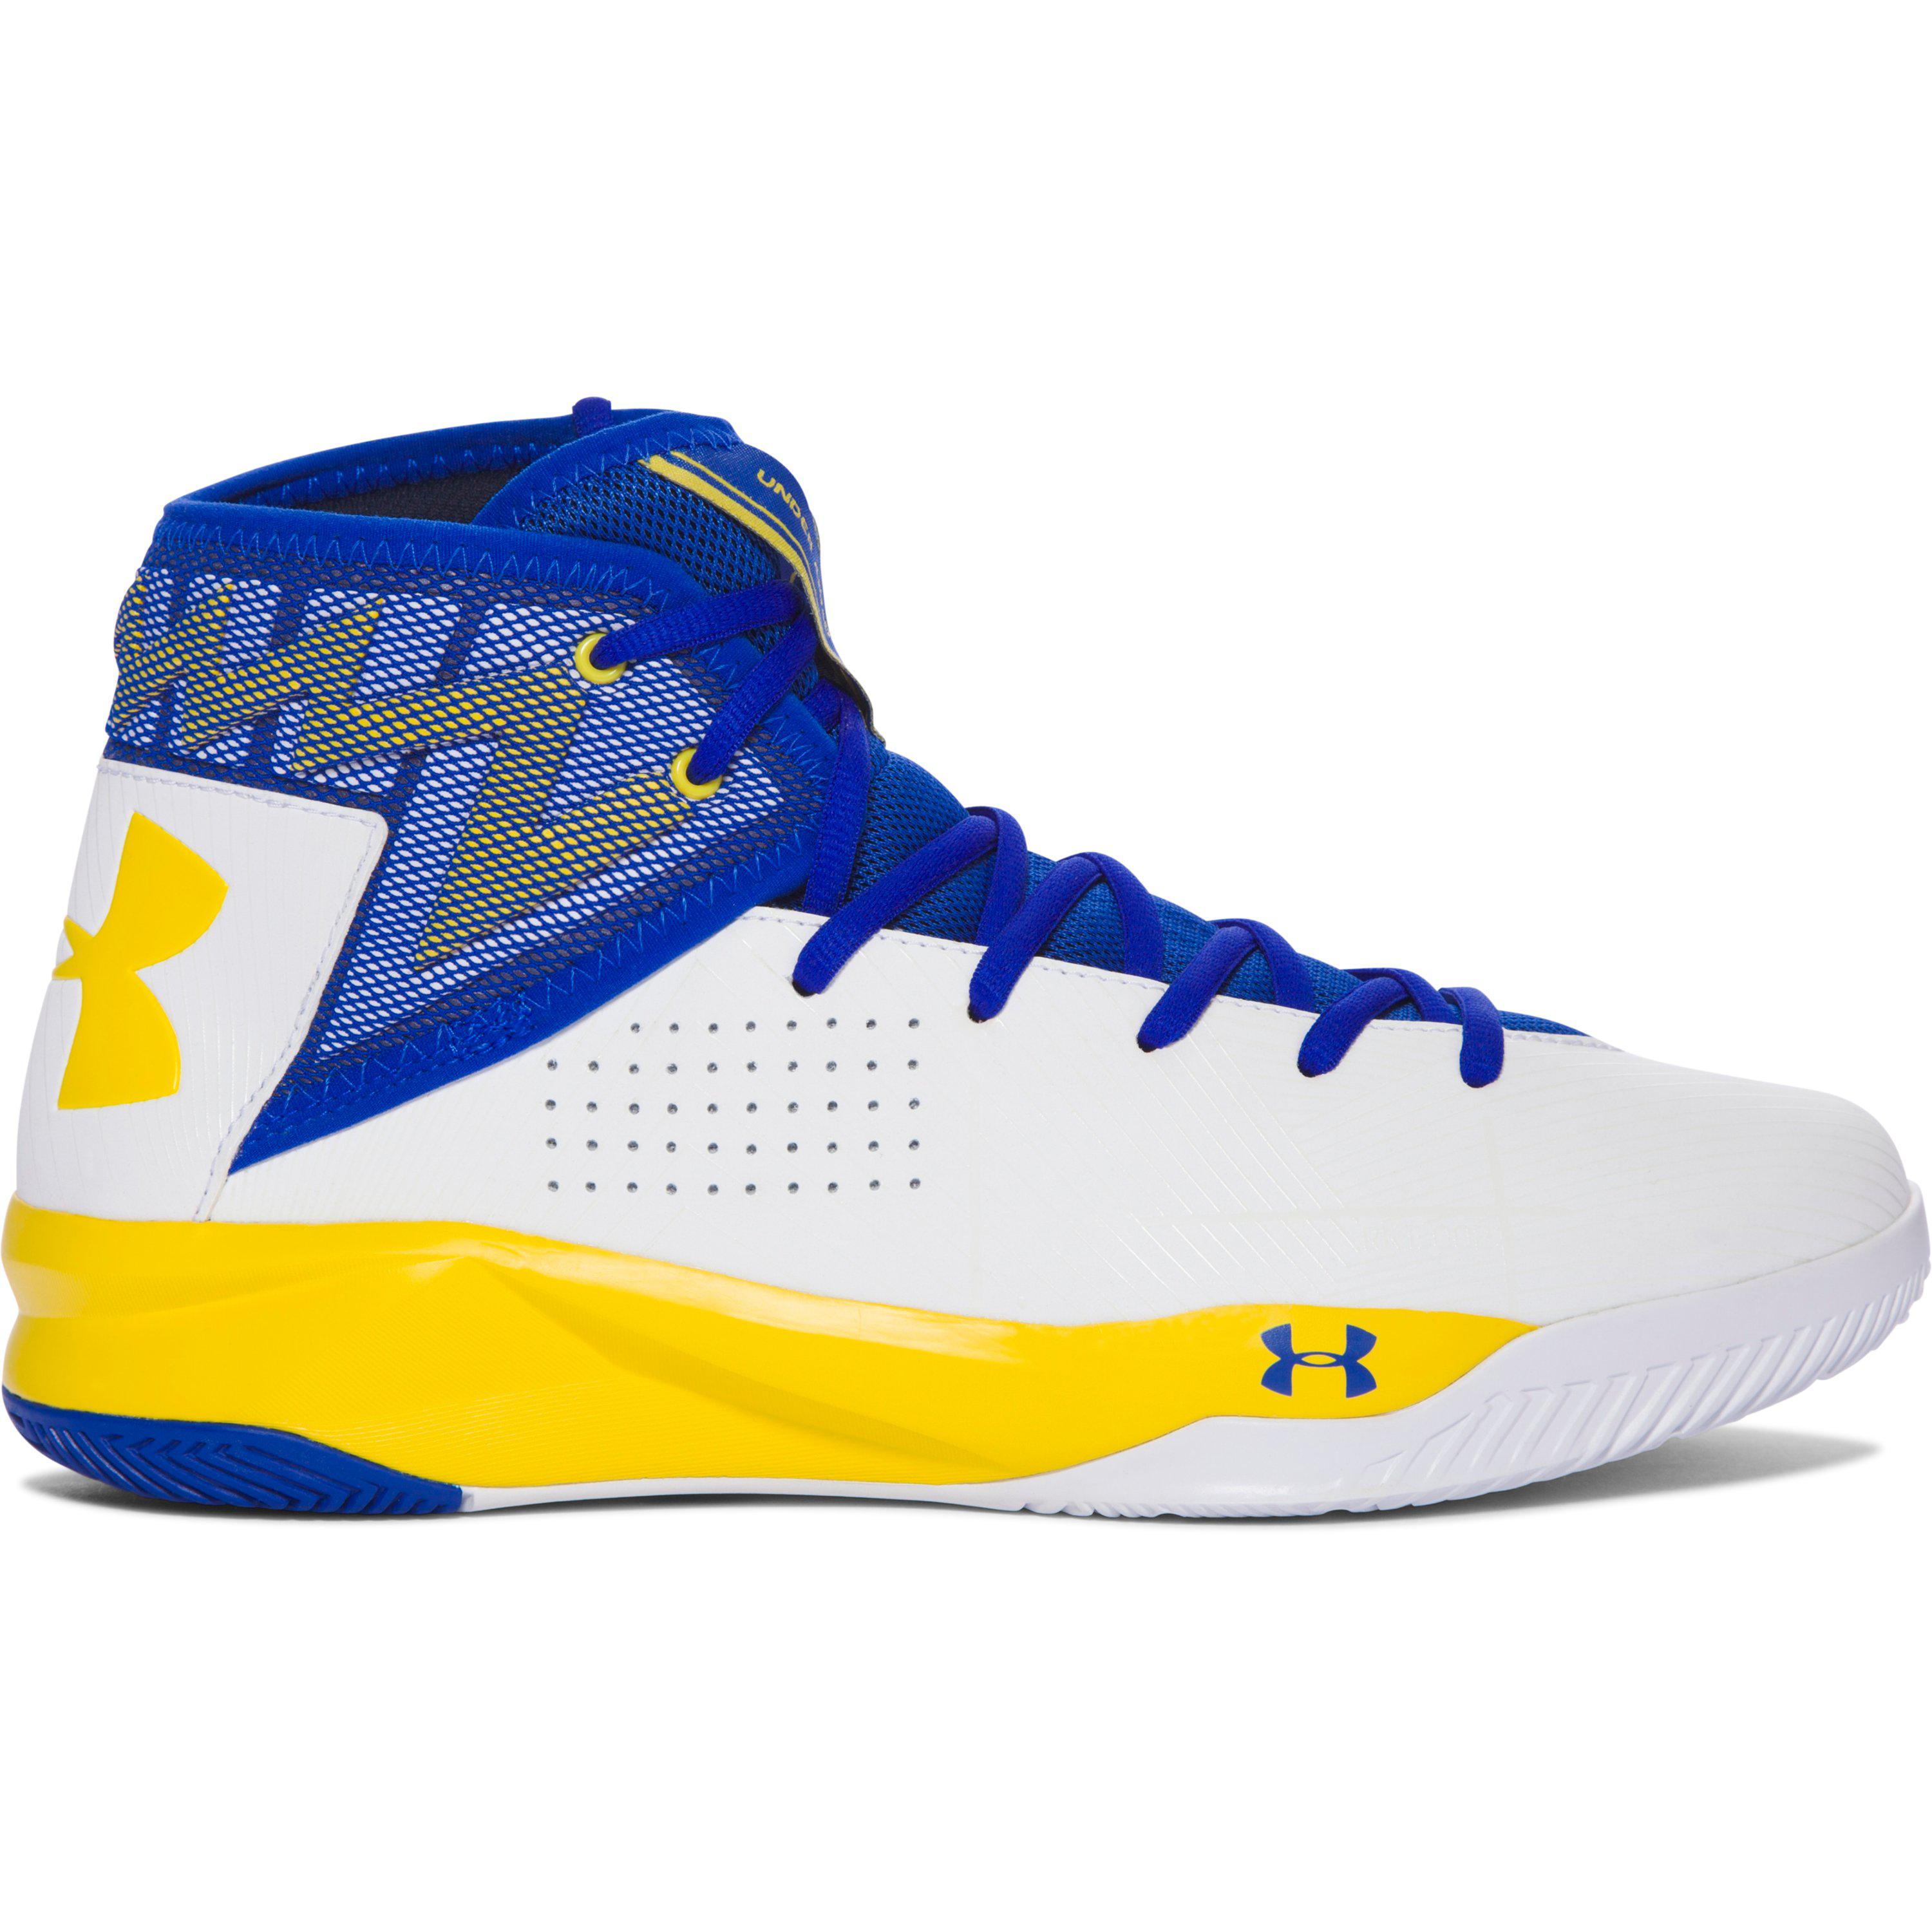 Lyst - Under Armour White Multi Rocket 2 Hi-top Sneakers in Blue for Men